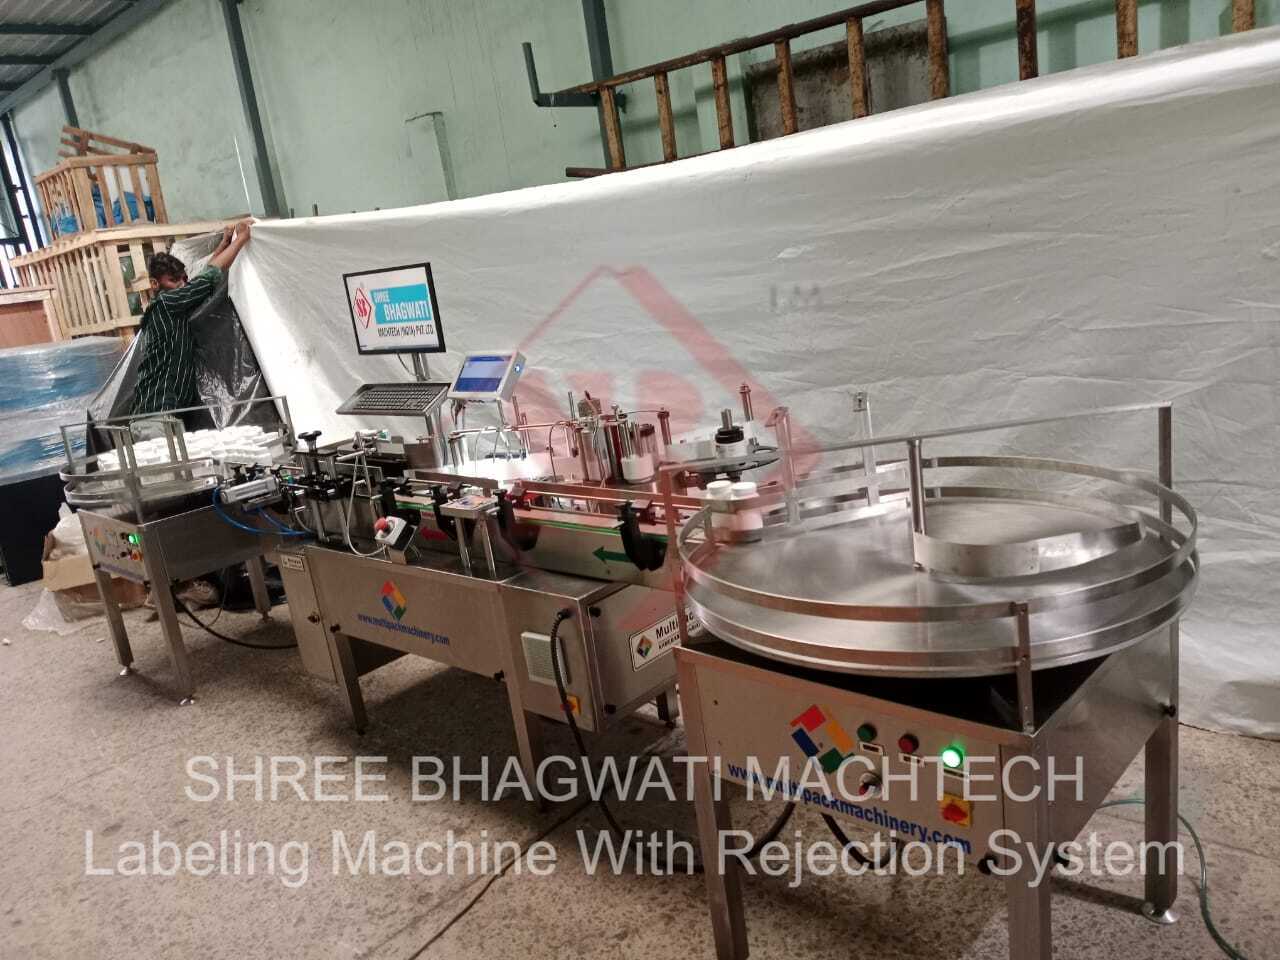 Labeling Machine With Rejection-Machine